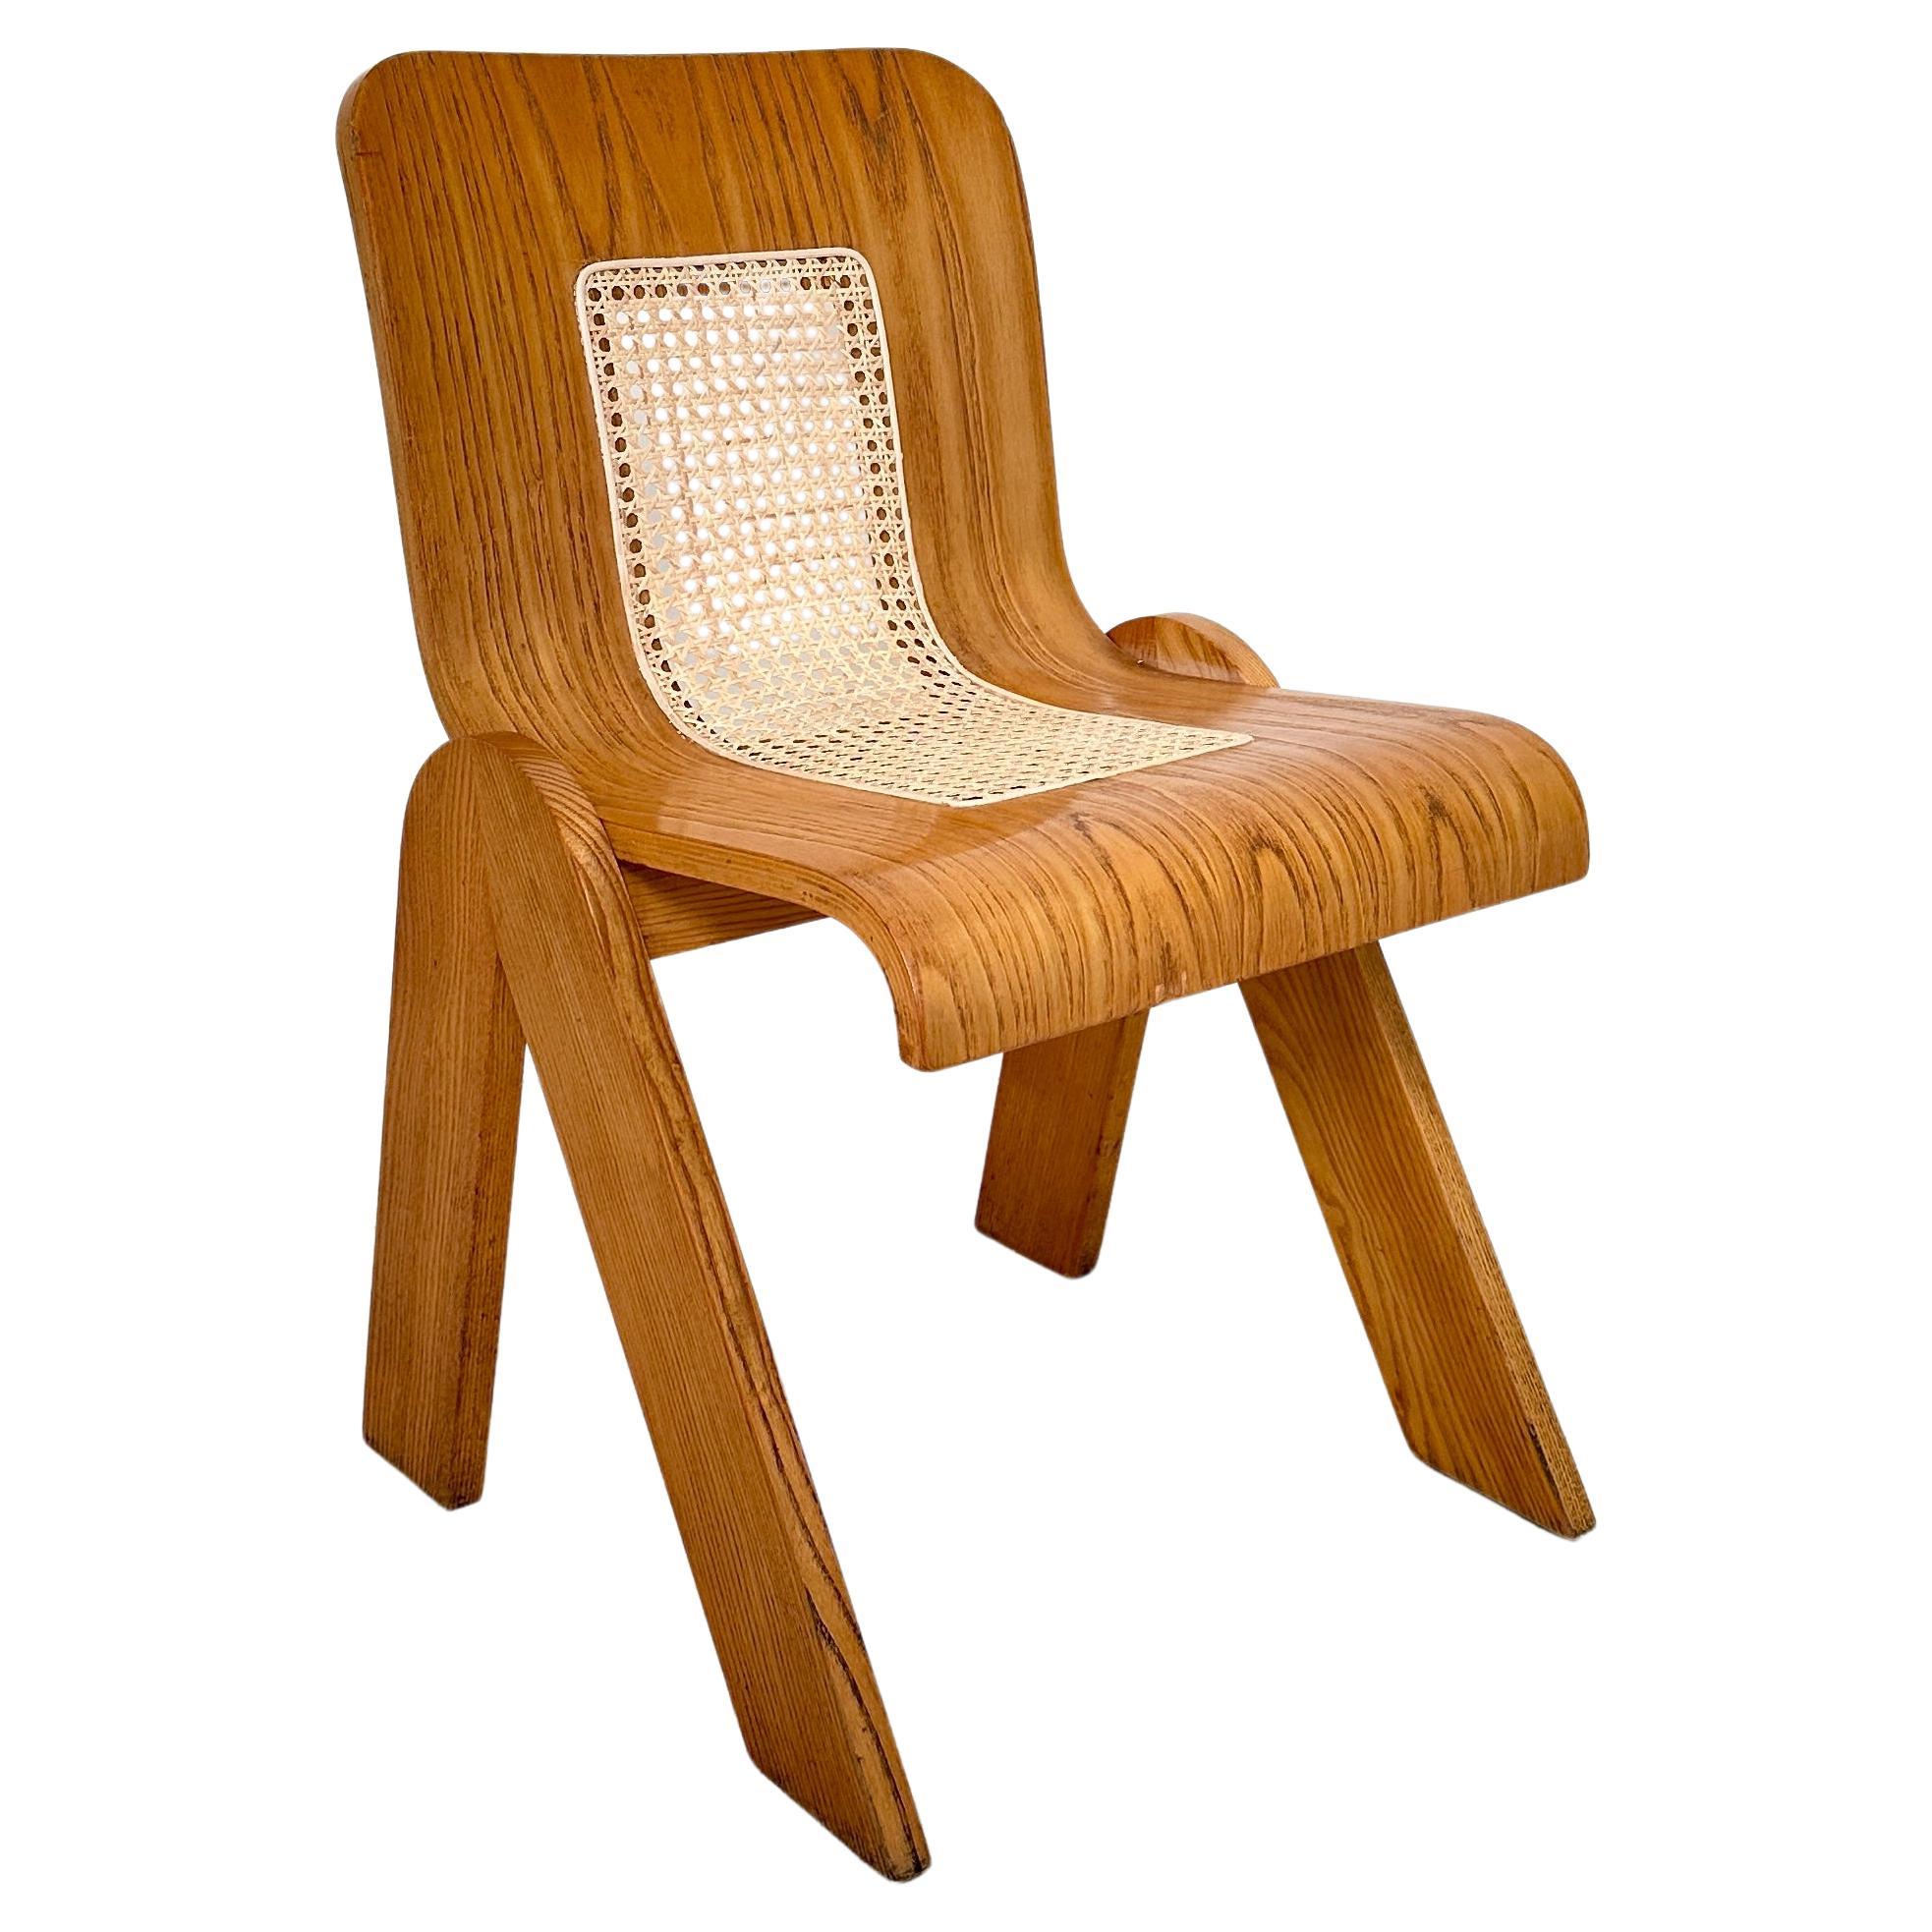 1 of 3 Mid Century Italian Ash Dining Chairs by Gigi Sabadin for Stilwood, 1970s For Sale